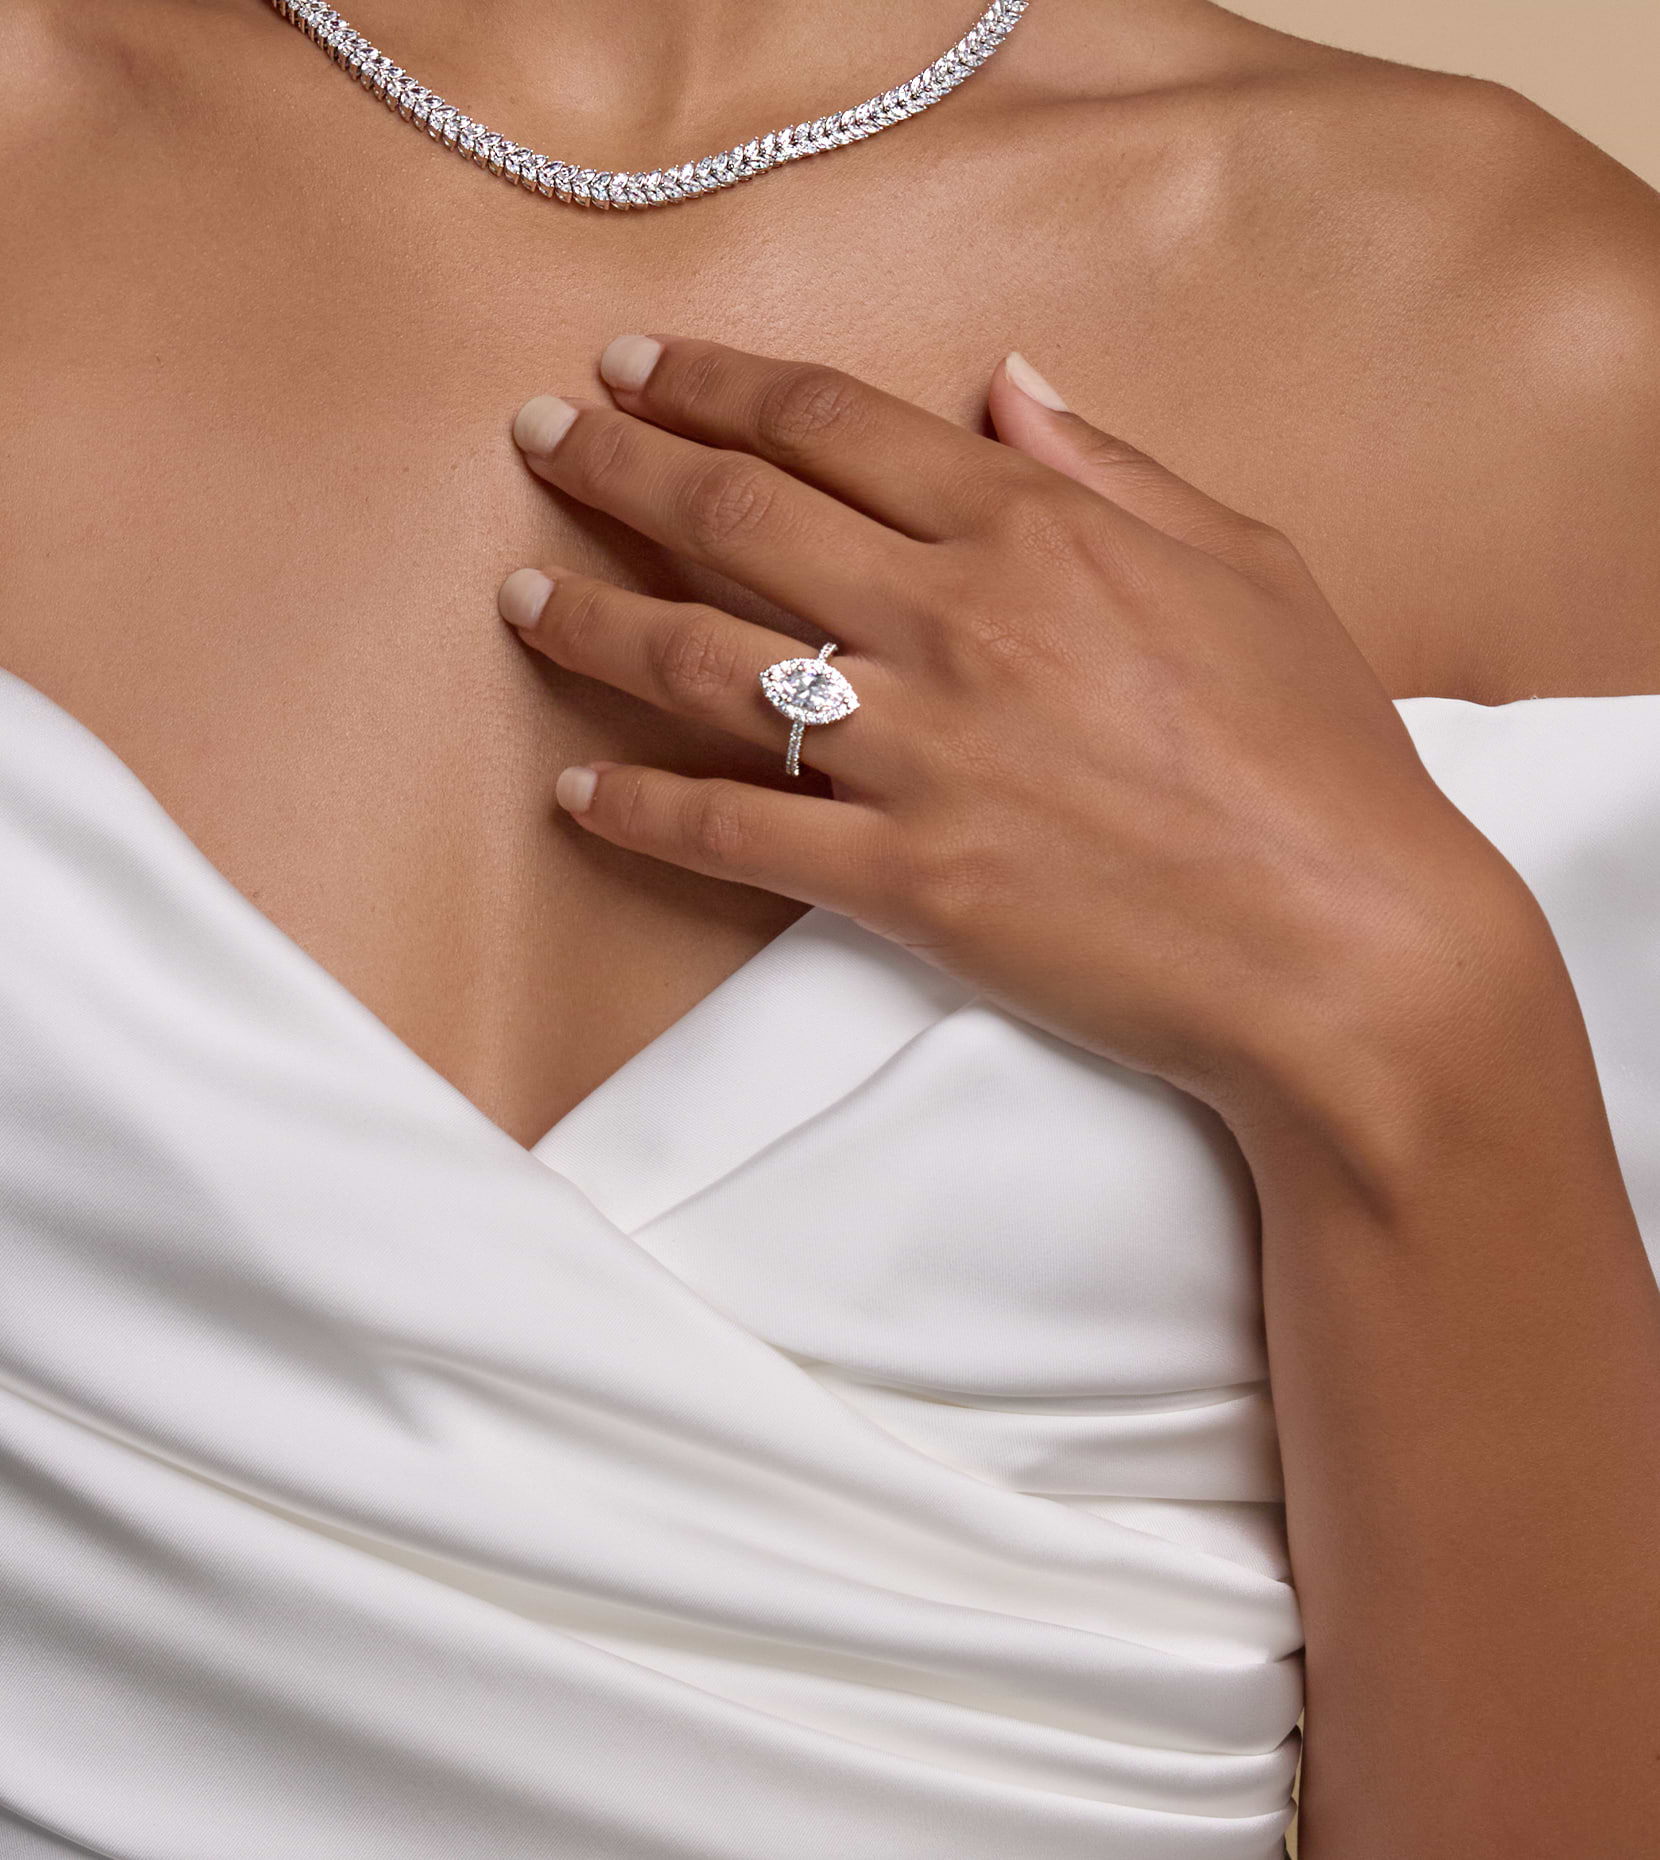 Image of woman's neck with diamond necklace and her hand gently placed against her chest featuring a diamond ring